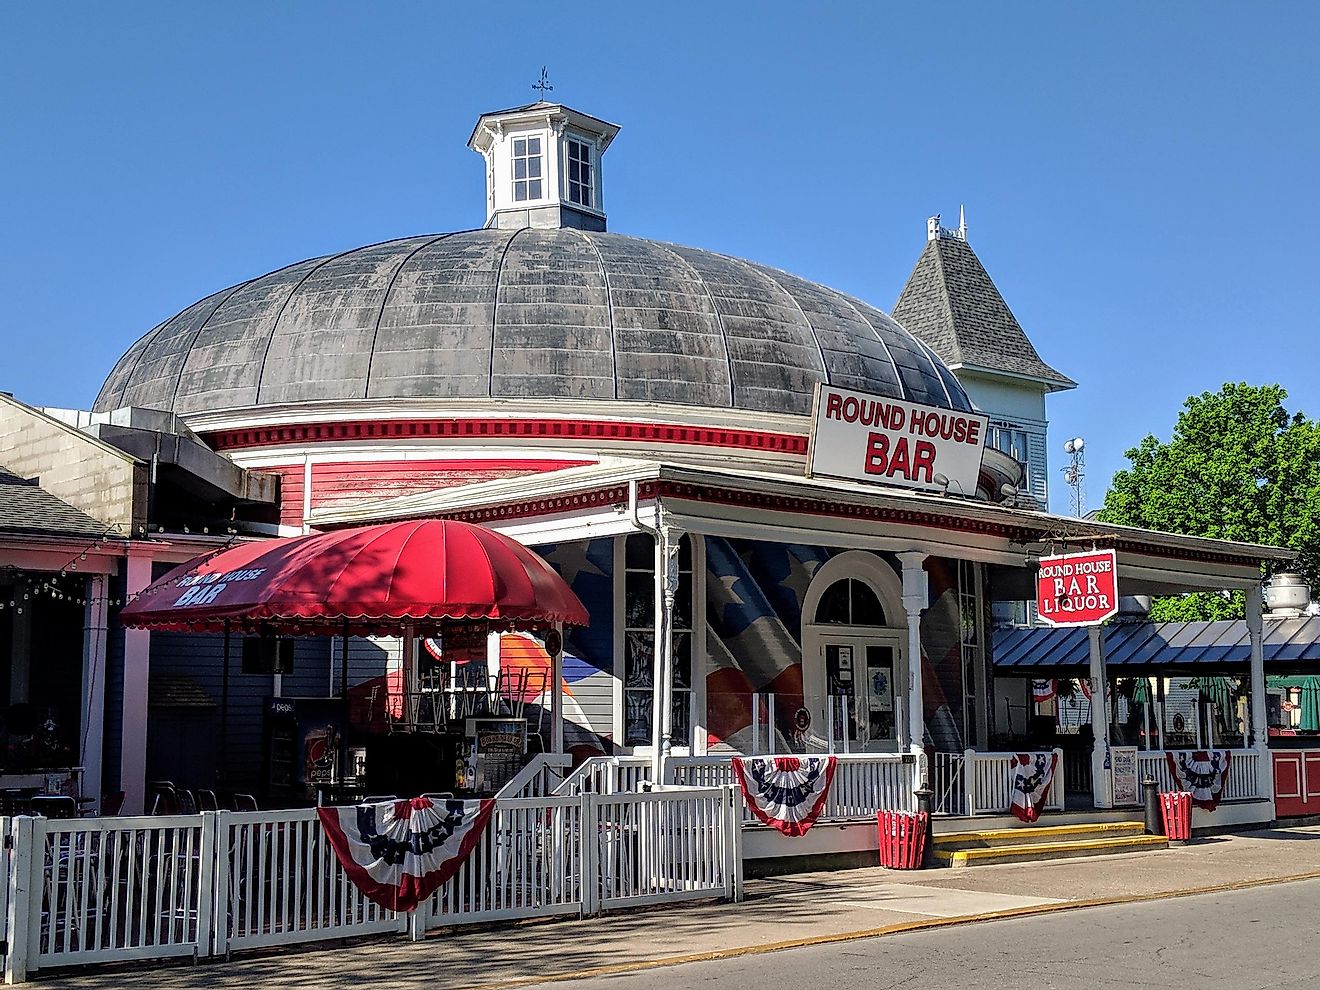 Put-in-bay, Ohio: Legendary Round House Bar at Put-in-Bay.